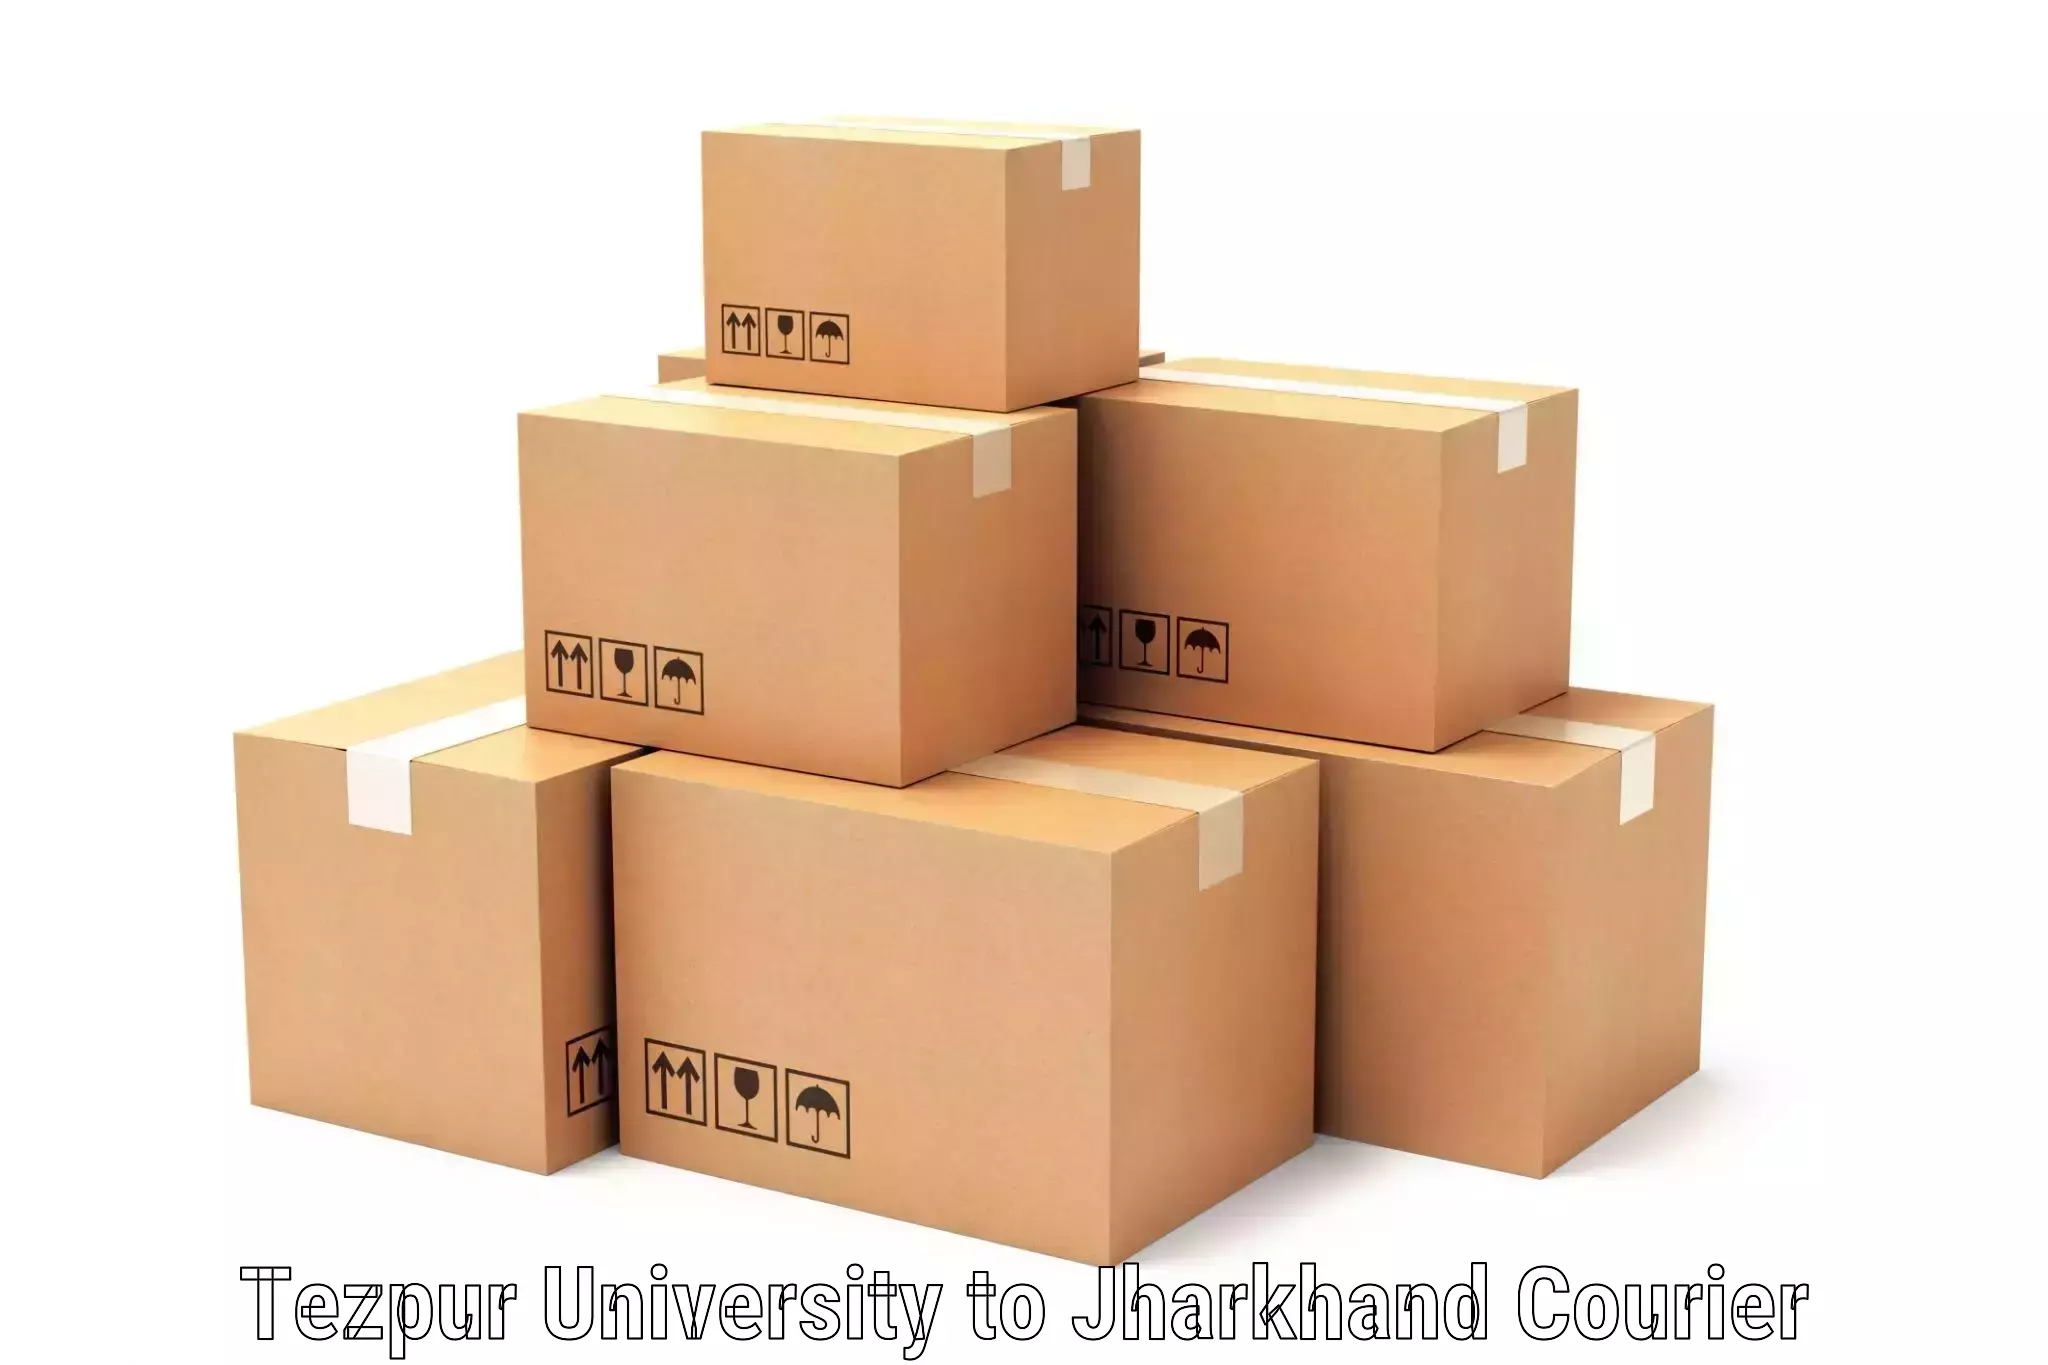 Ocean freight courier in Tezpur University to Boarijore